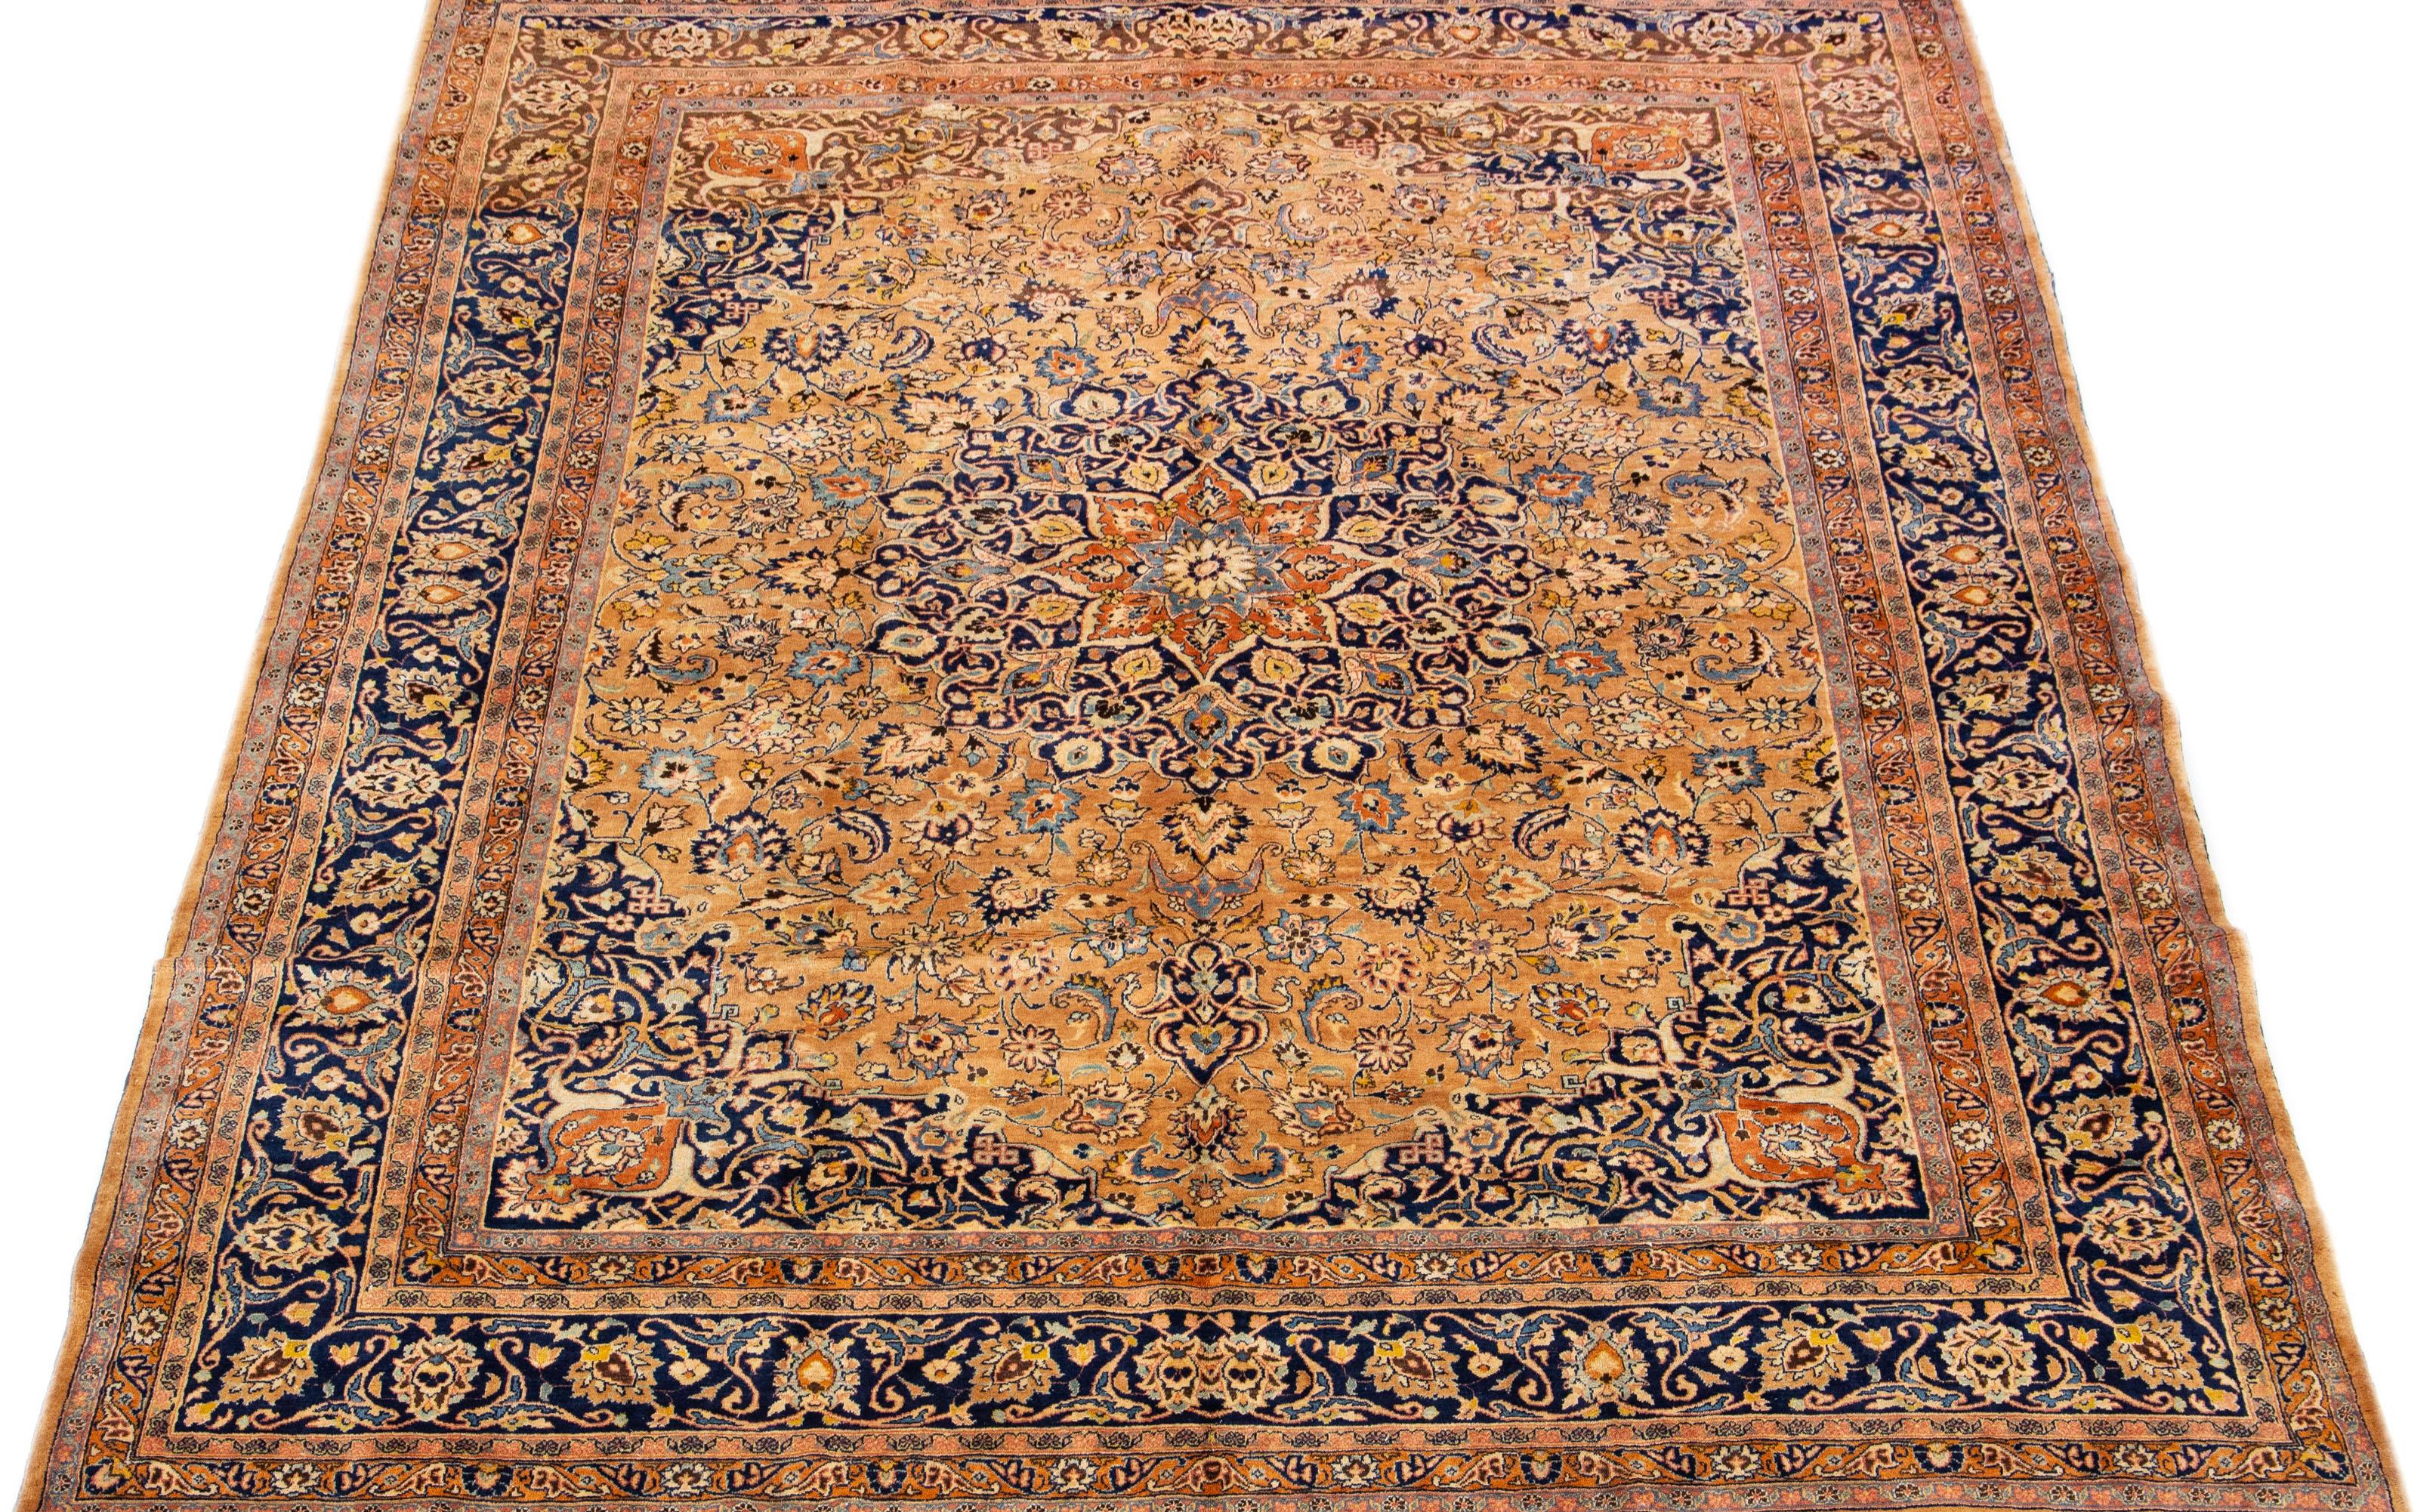 This wool rug boasts an exquisite antique Mashad hand-knotted texture, featuring a deep light brown field with an intricate blue classic medallion floral design. 

This rug measures 10'3